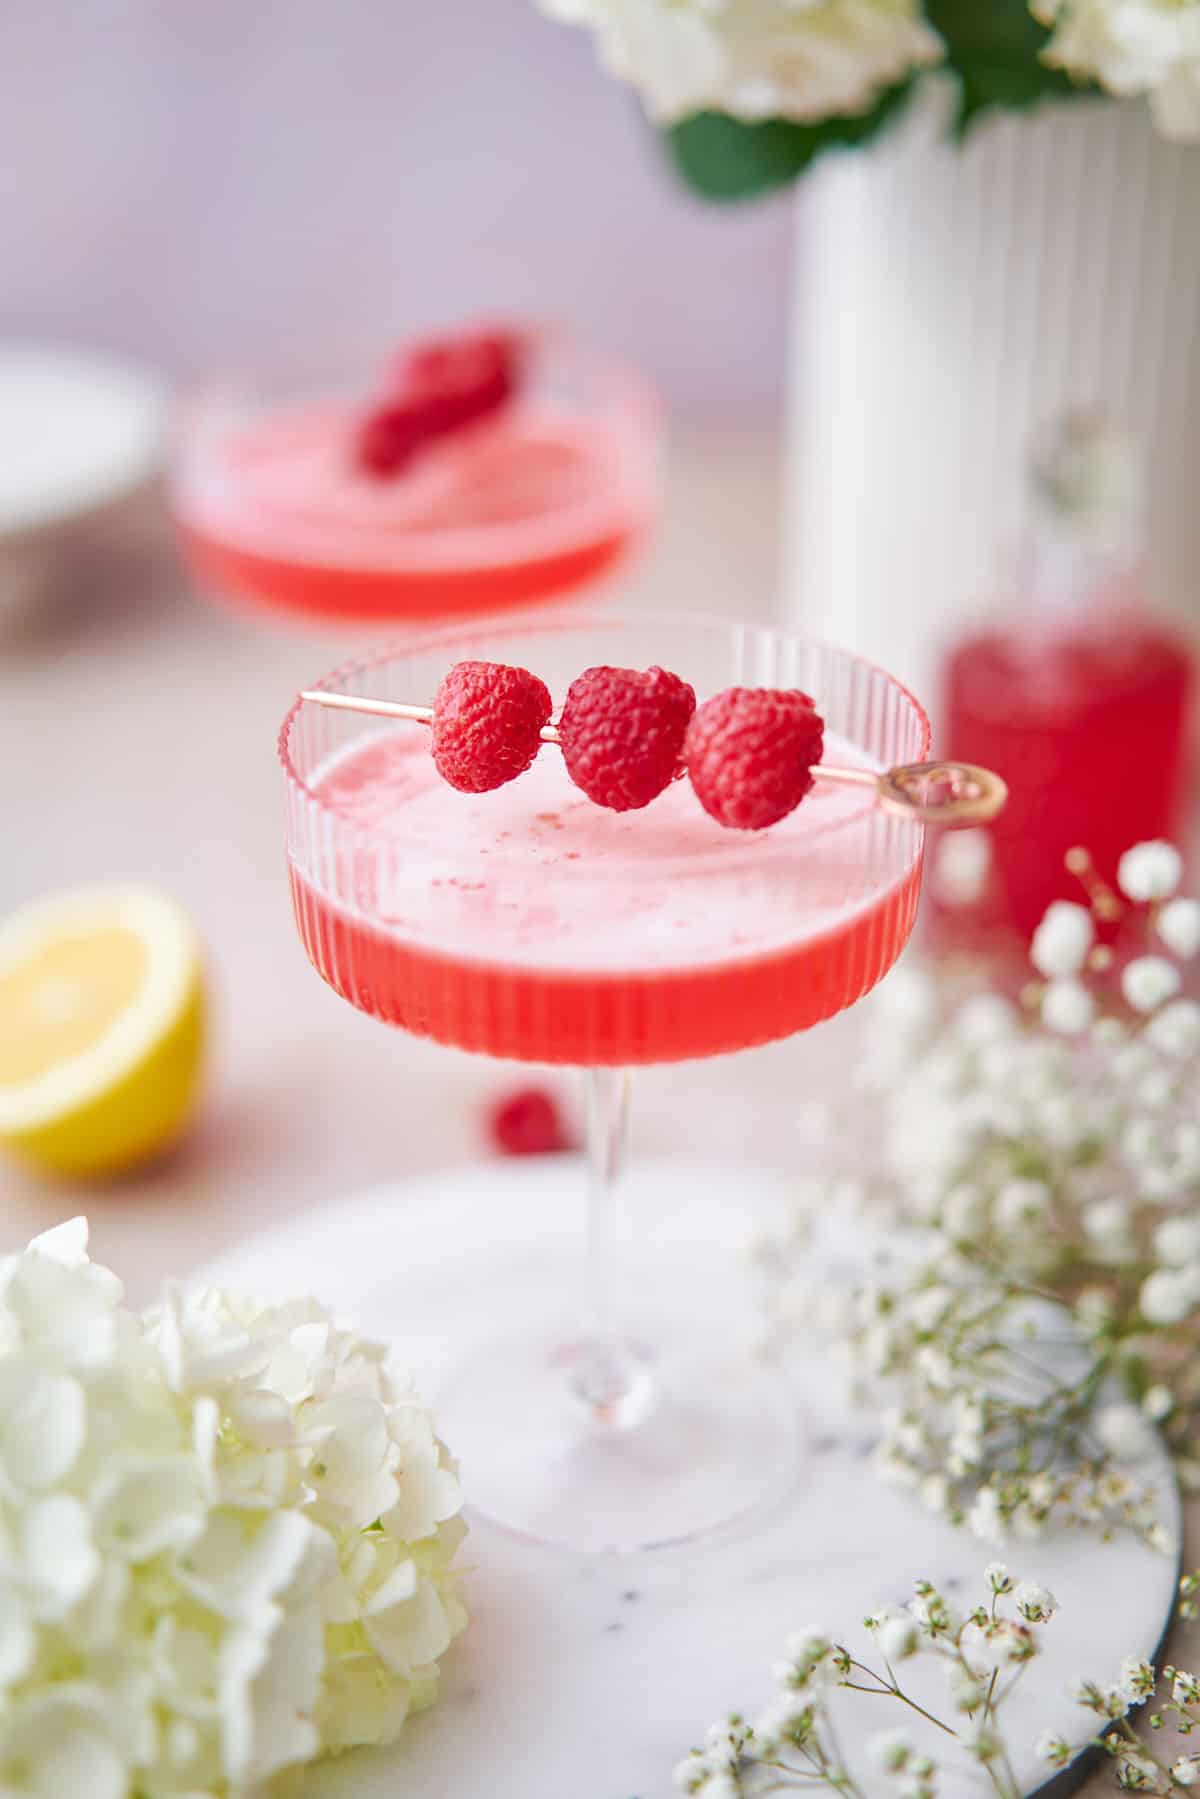 stunning raspberry martini in couple glass, with fresh raspberries, in a whimsical setting, surrounded by baby's breath flowers, and fresh lemons.